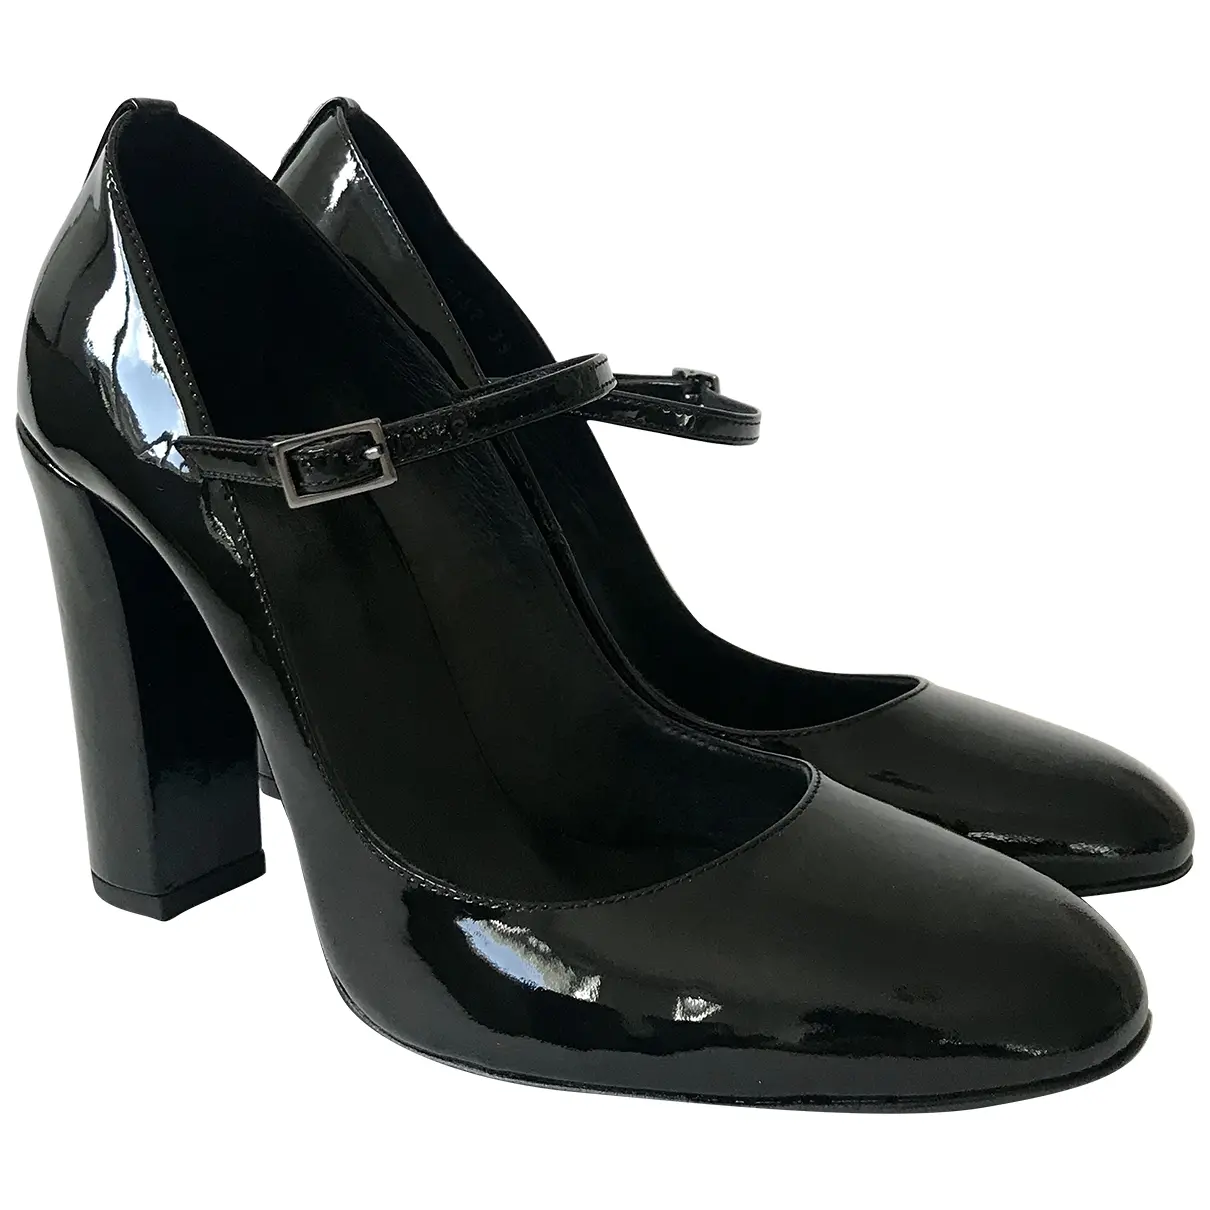 Patent leather heels The Kooples